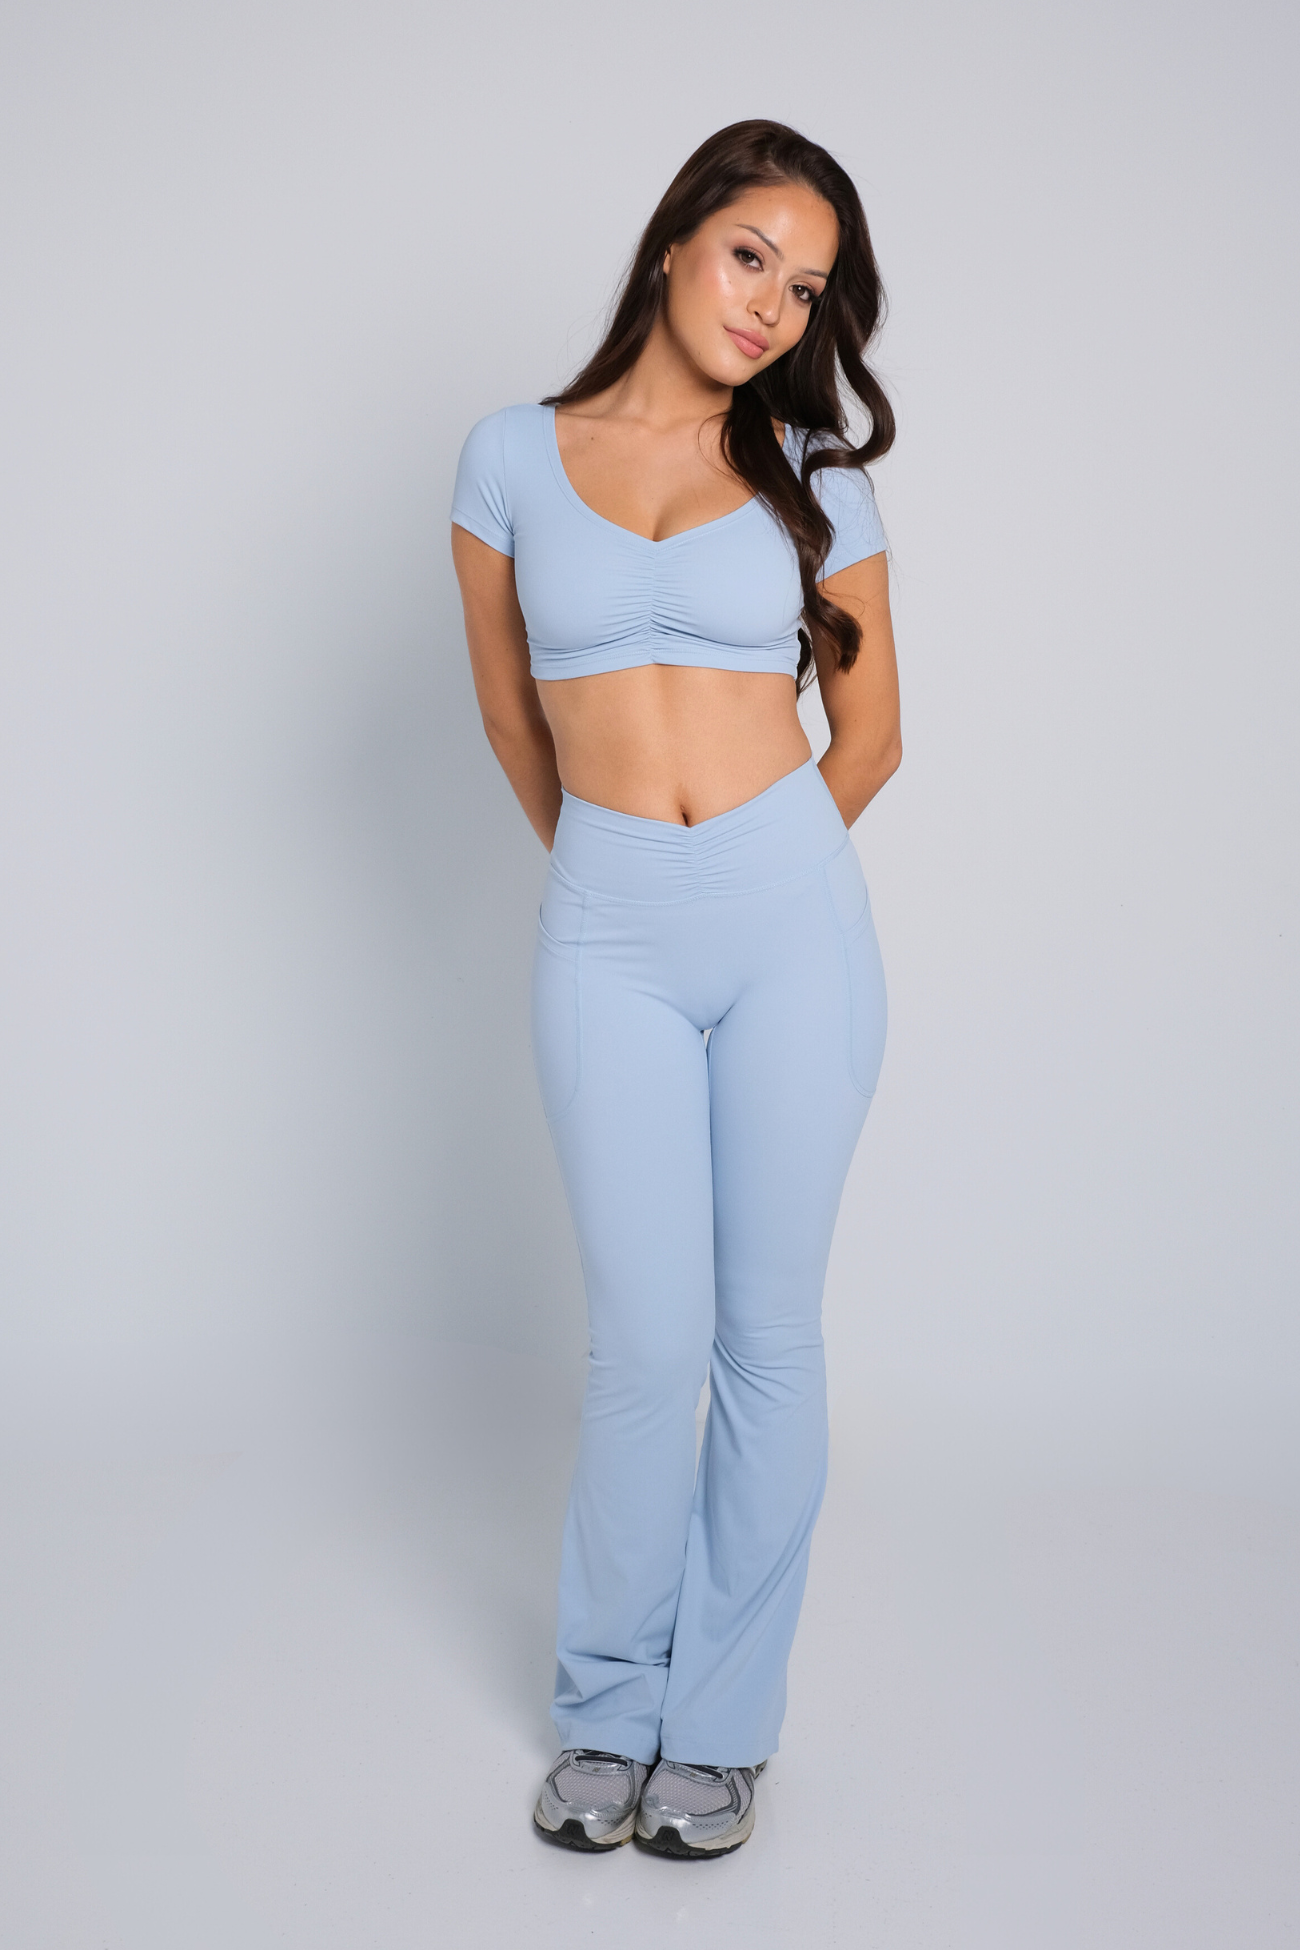 Ruched Crop Top - Baby Blue